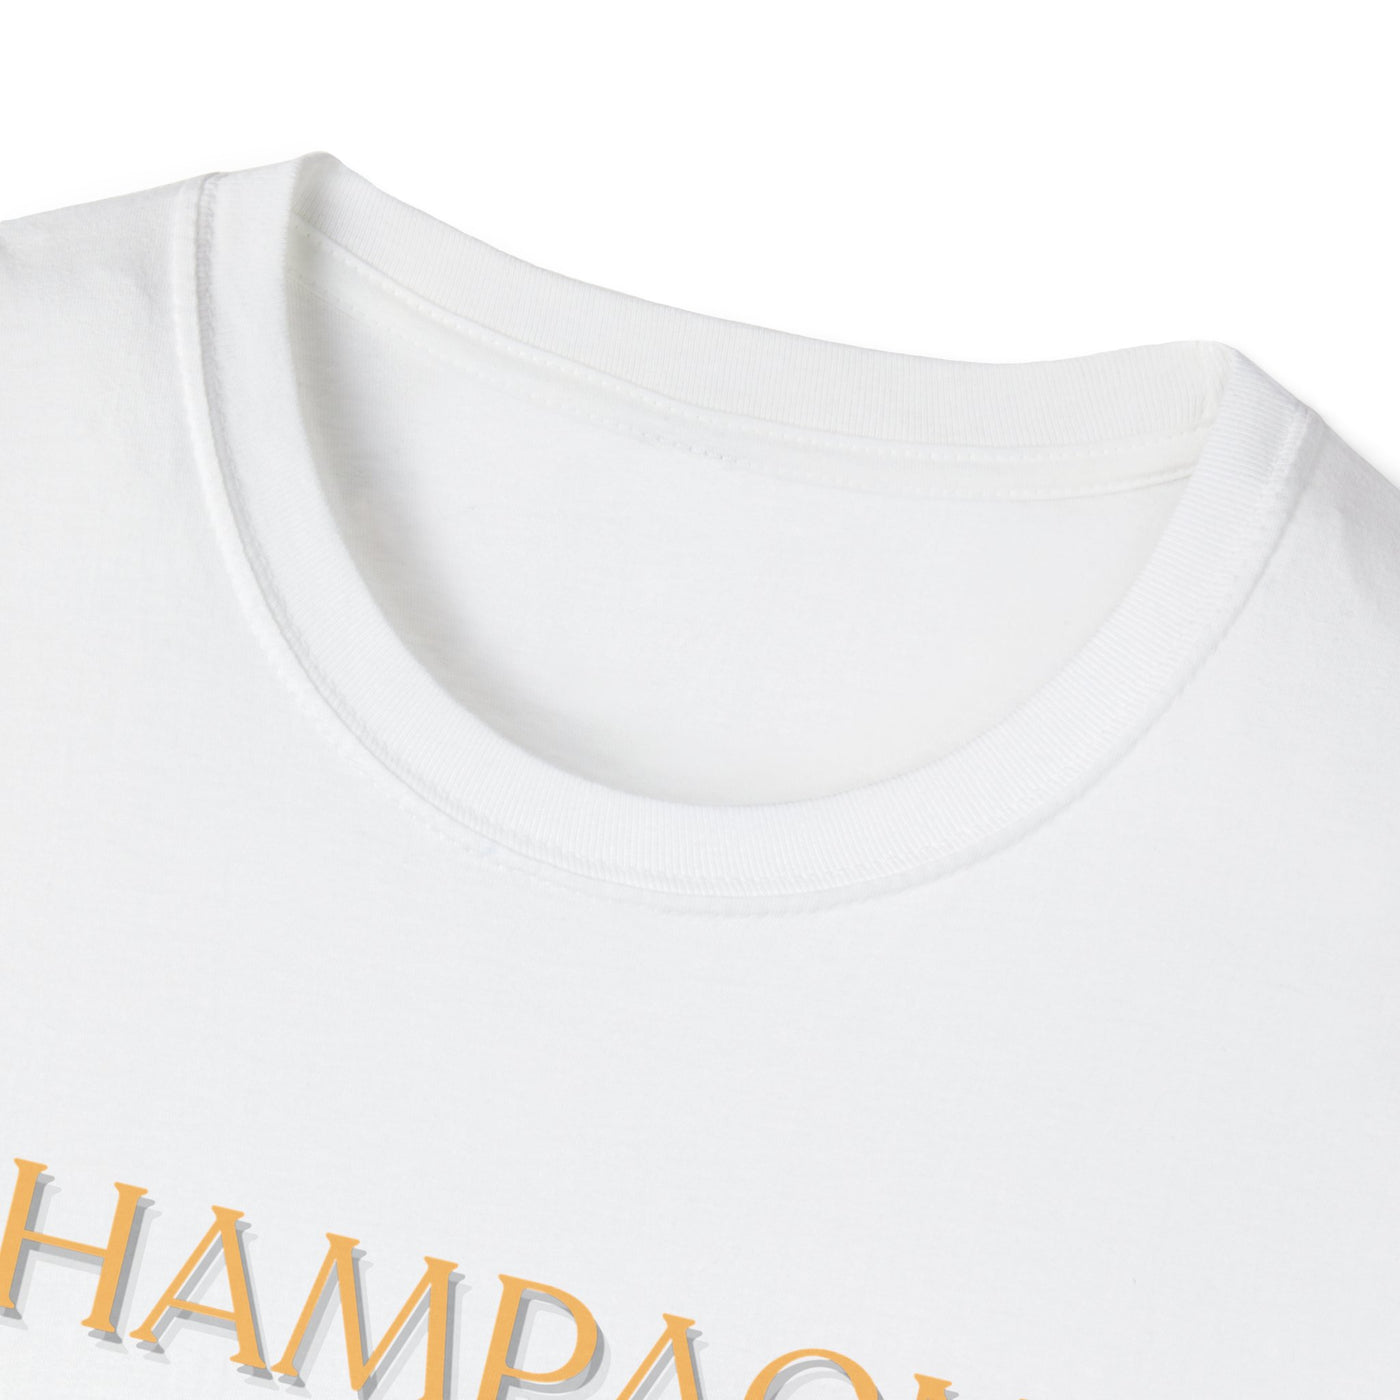 "Champagne Please" Softstyle T-Shirt